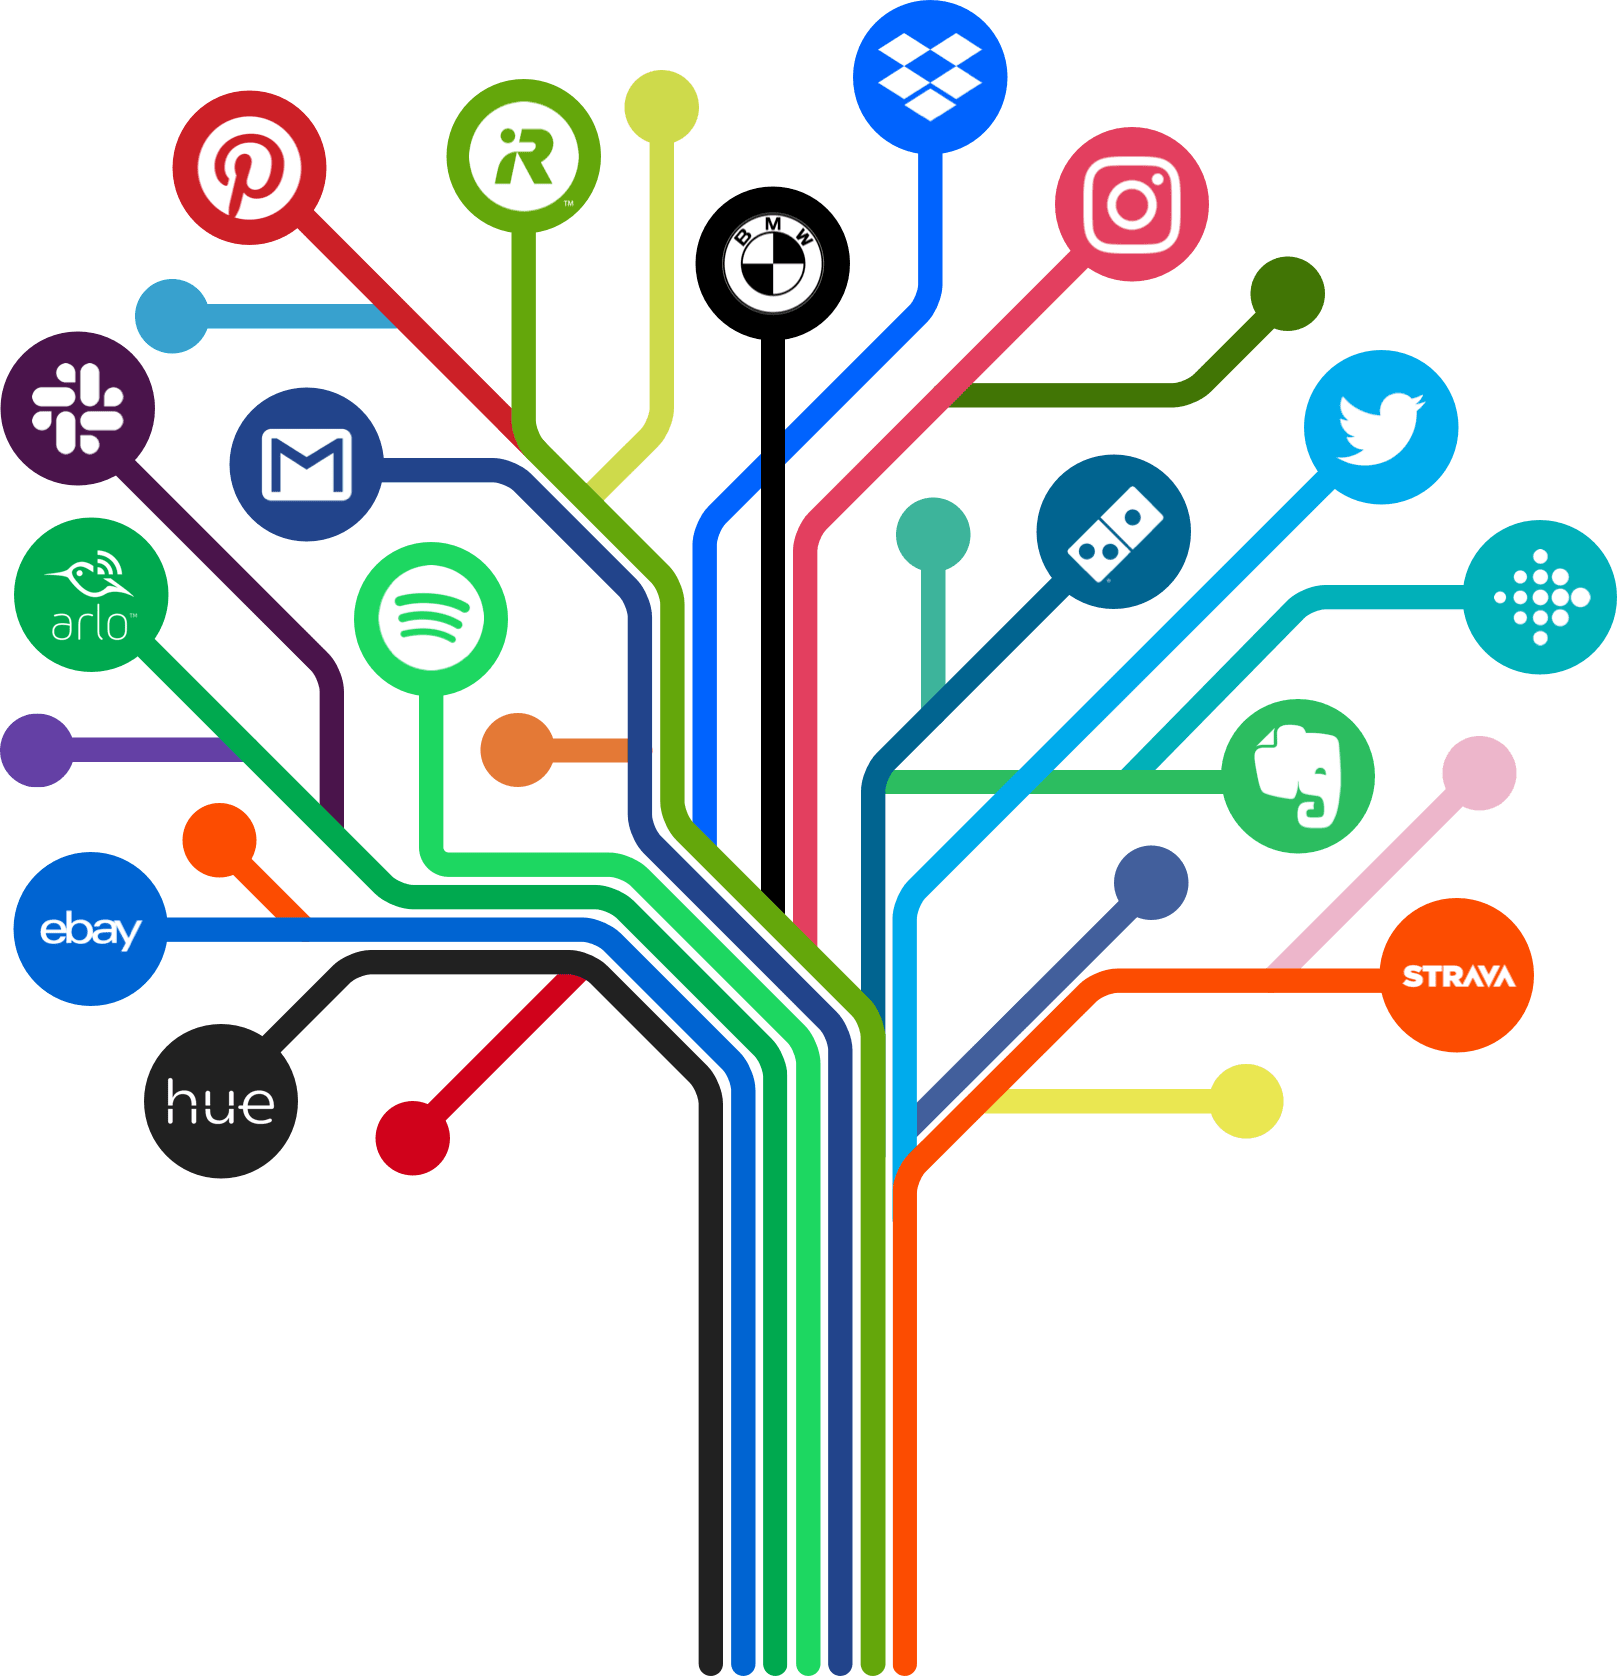 IFTTT - a tree symbol to demonstrate the interconnectivity